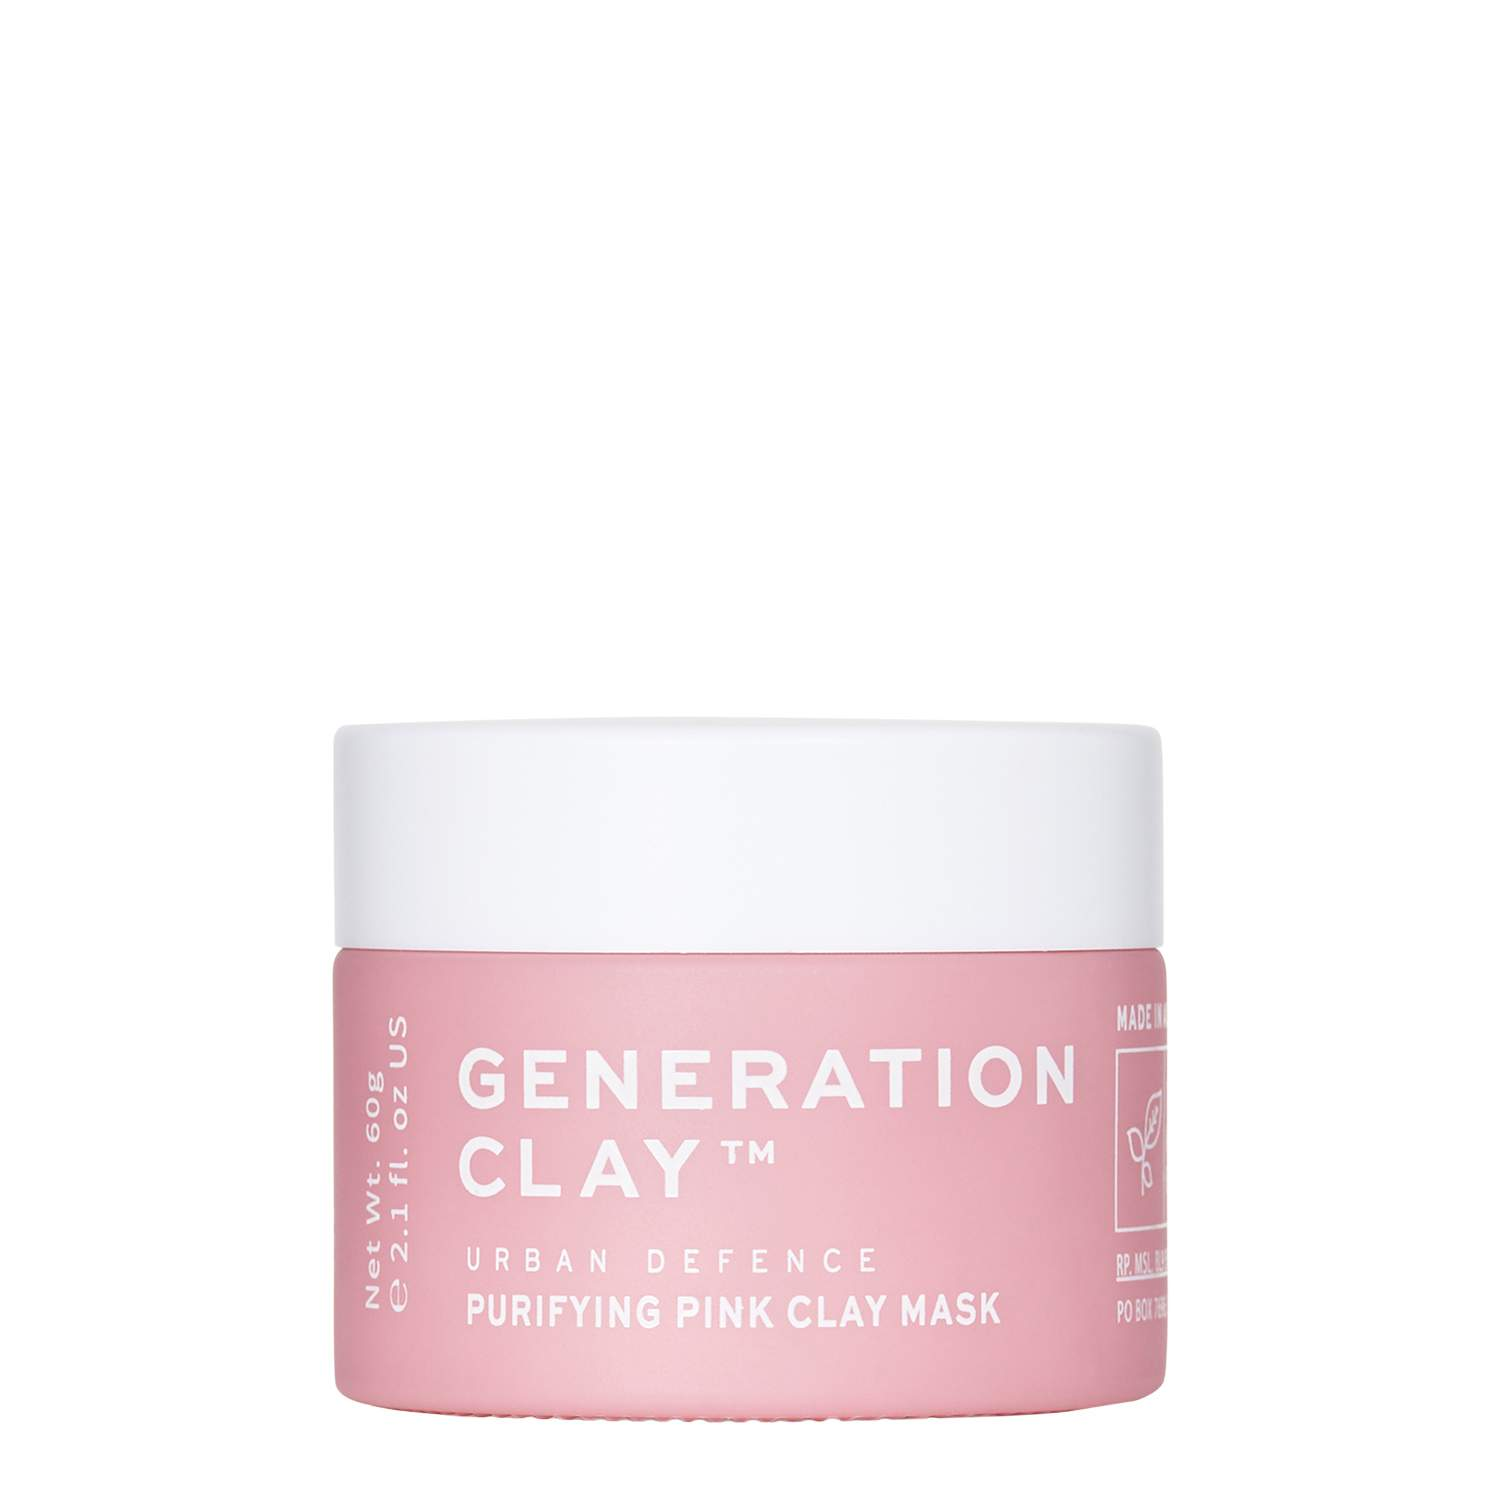 Generation Clay Urban Defence Pink Purifying Clay Mask Generation Clay Urban Defence Pink Purifying Clay Mask 1